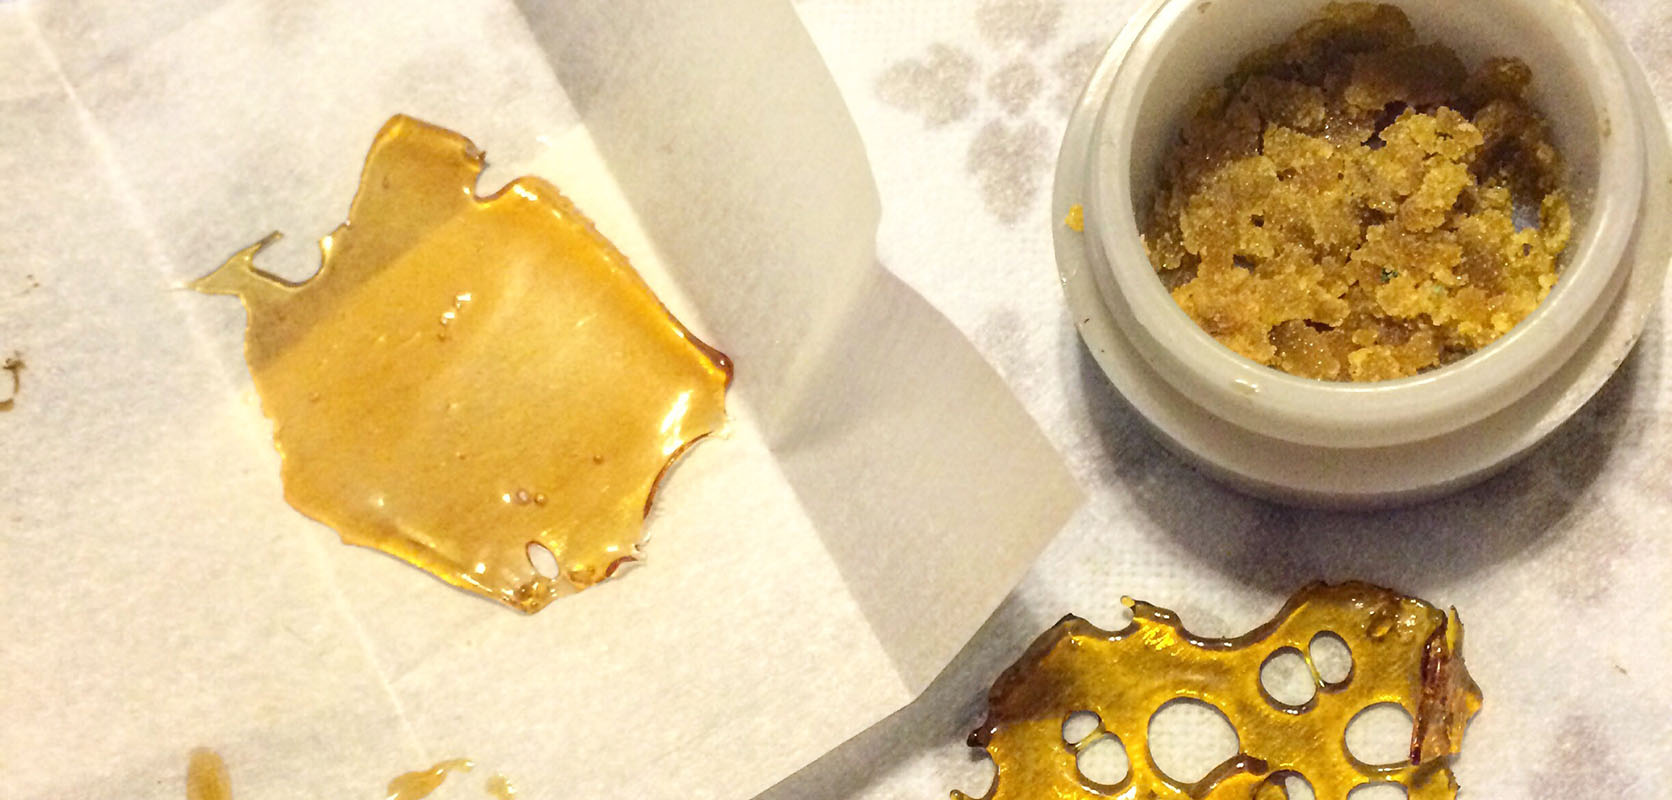 keif, crumble, wax, and shatter for sale online dispensary west coast cannabis. THC concentrates for sale.